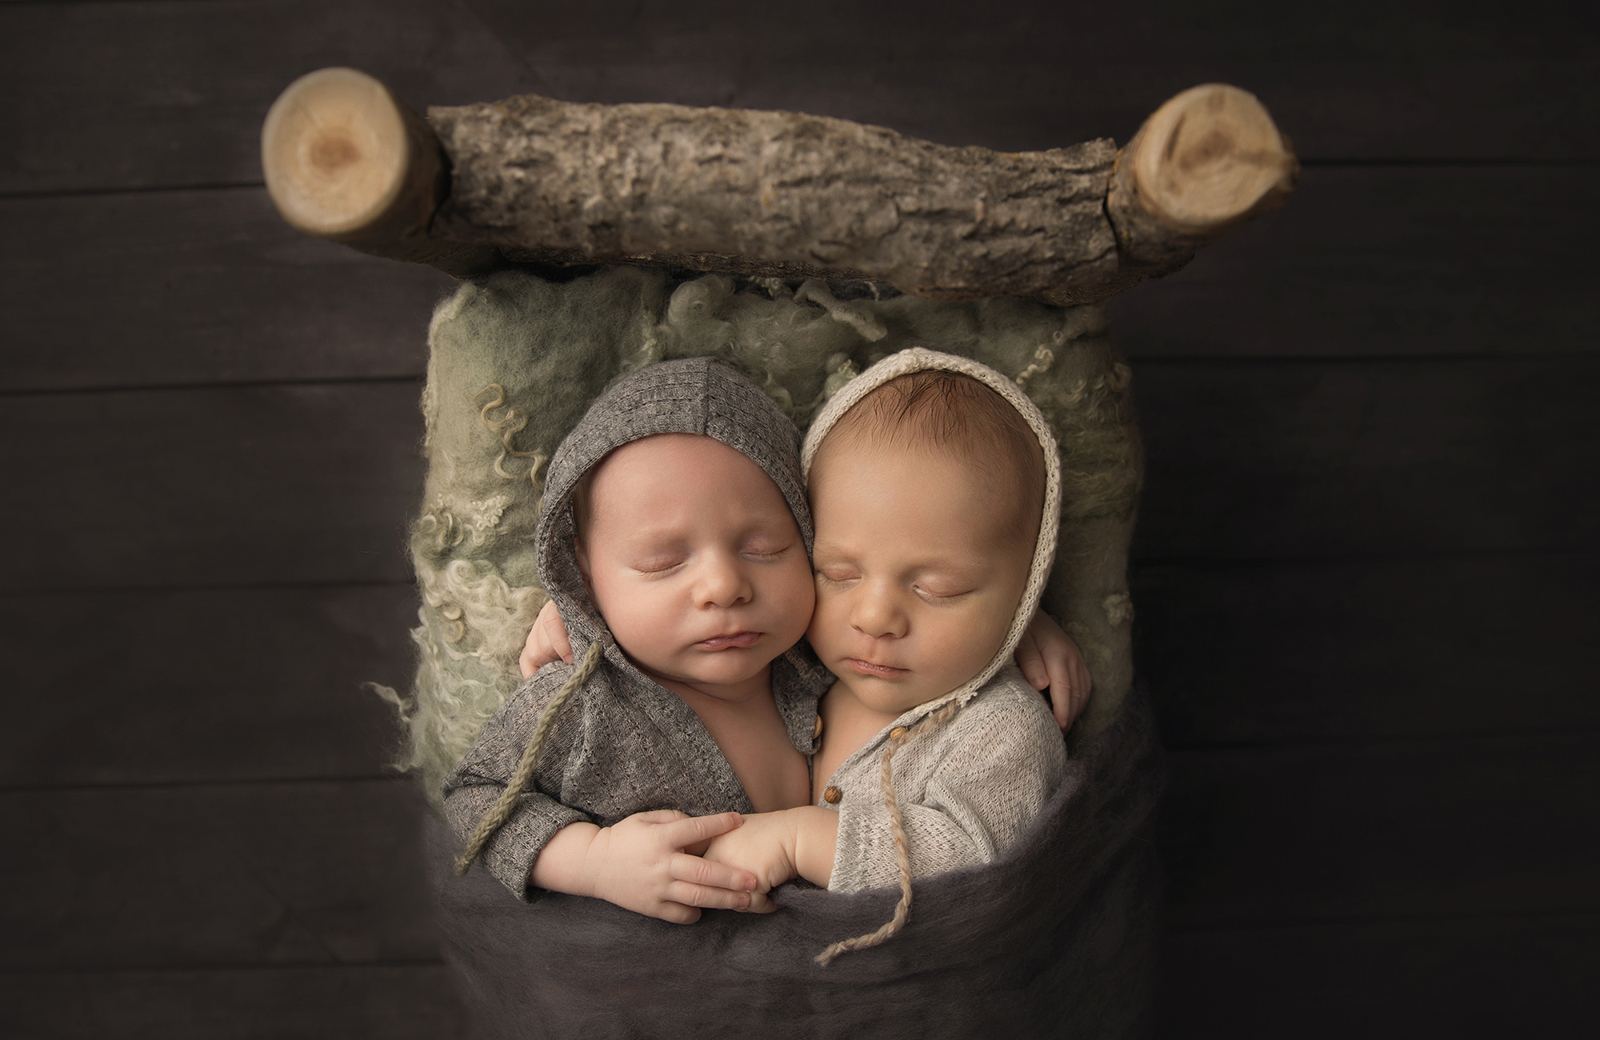 Studio newborn twins portrait session with dark background, the twins sleeping together and holding hands on a custom-made wooden log bed. Image by Helga Himer Photography, Sudbury, Ontario.